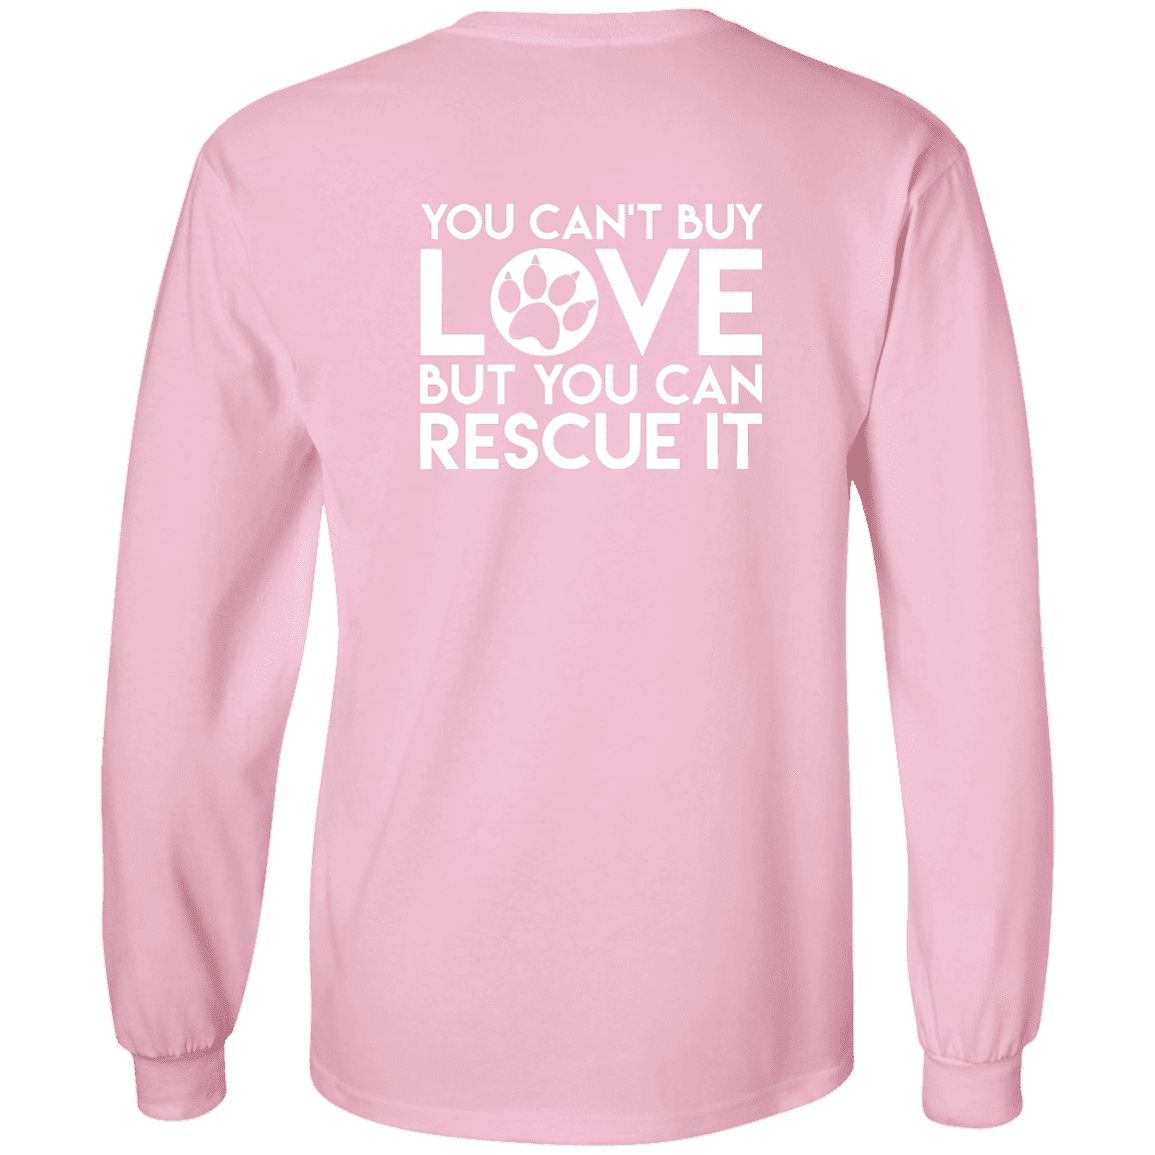 You Can't Buy Love - Long Sleeve T Shirt.